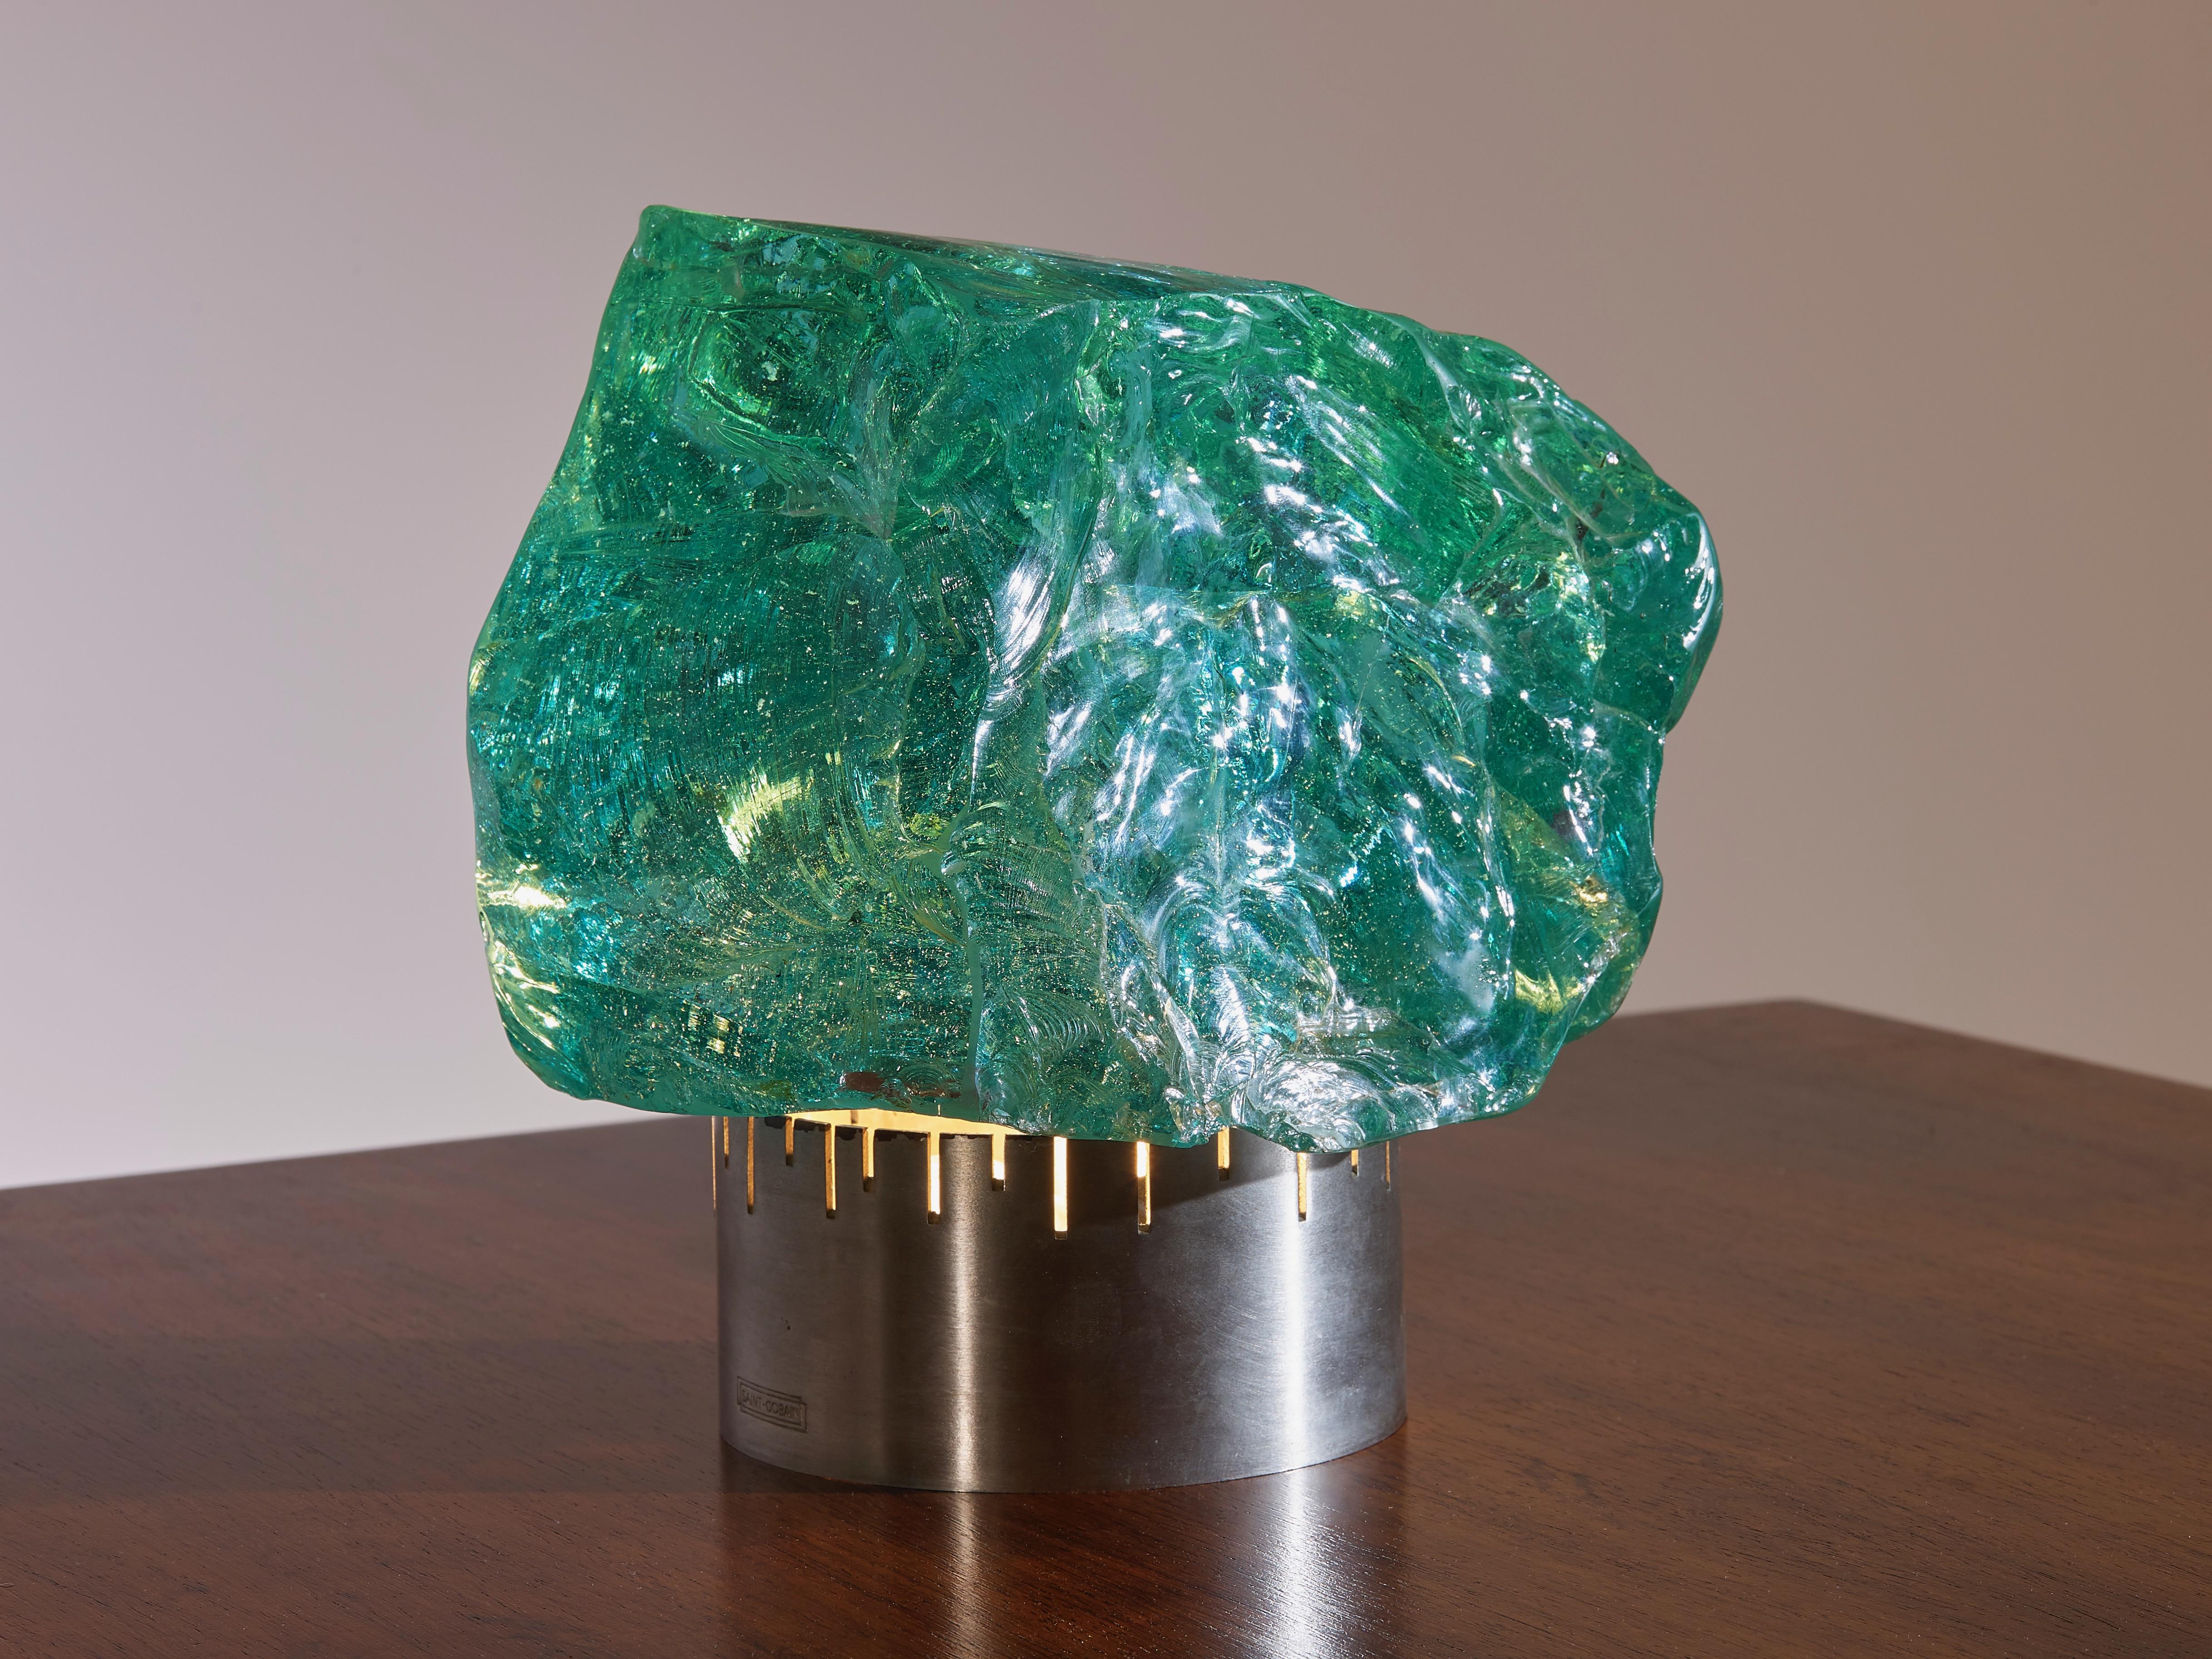 An attractive chiselled glass table lamp designed in the 1960s by Max Ingrand for the French glass company Saint-Gobain. 

This table lamp is composed of two pieces: a magnificent handmade chiseled emerald green glass on the top of a brushed,